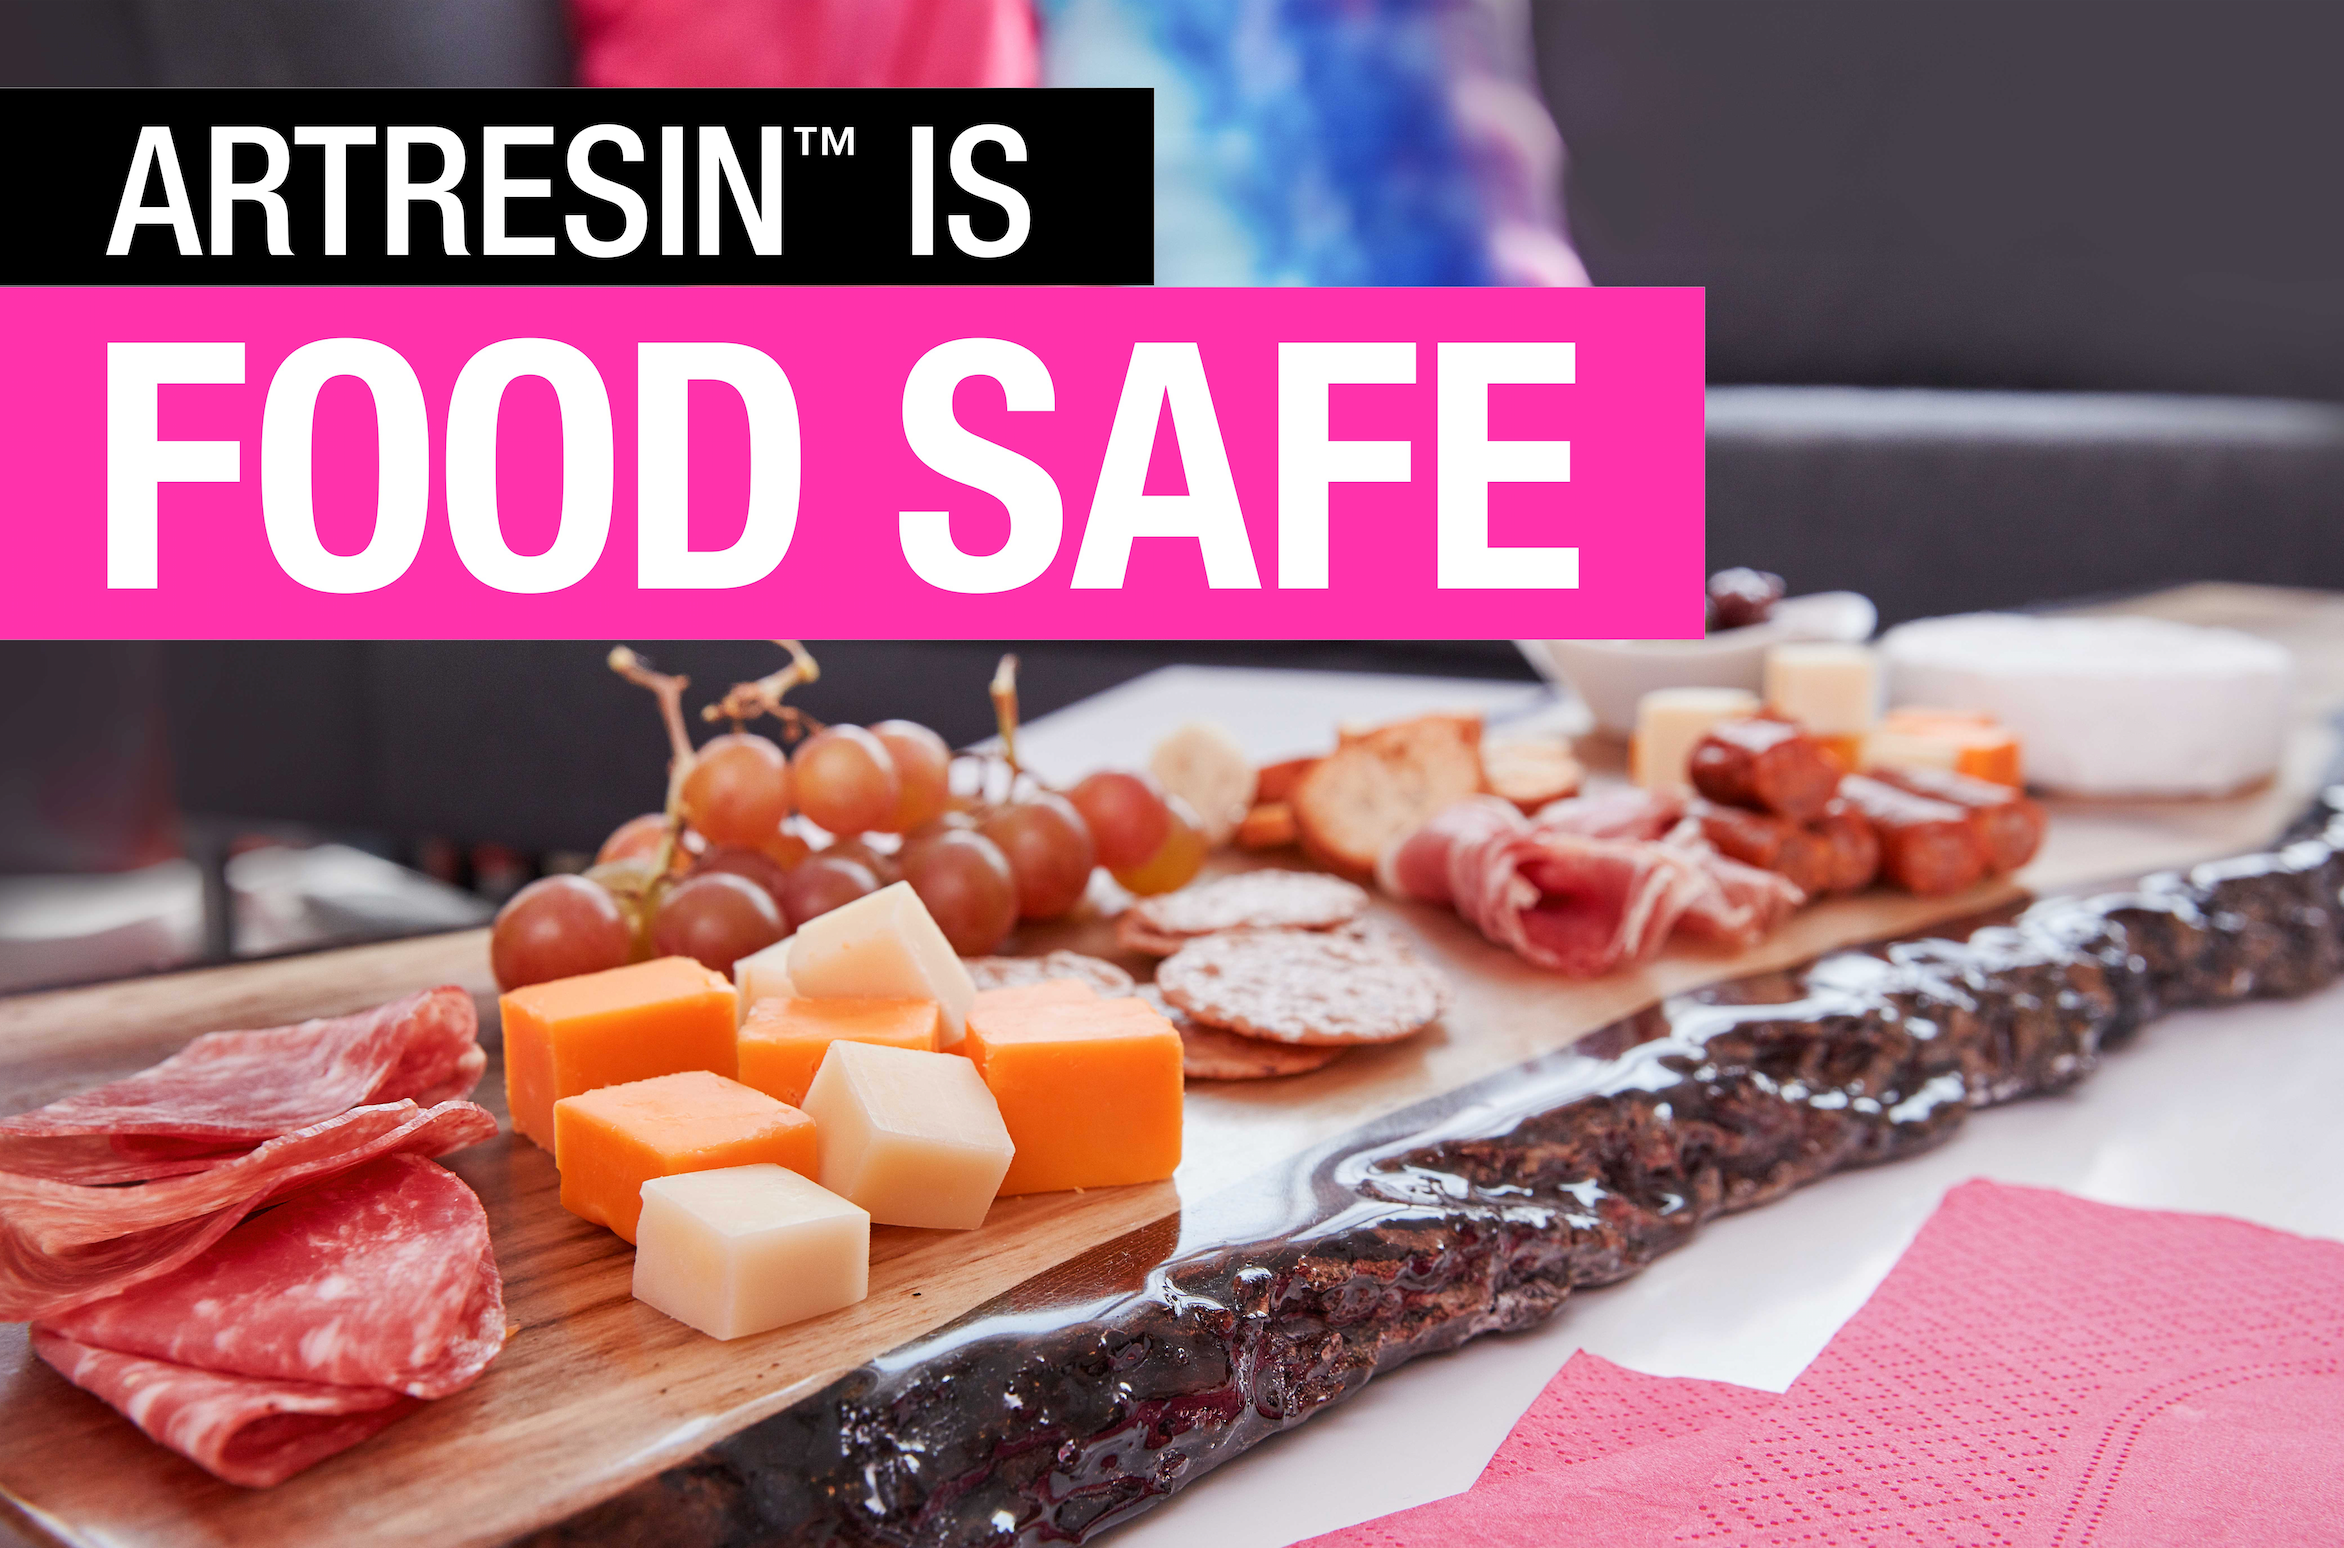 ArtResin Passes Food Safety Tests, Resin Crafts Blog